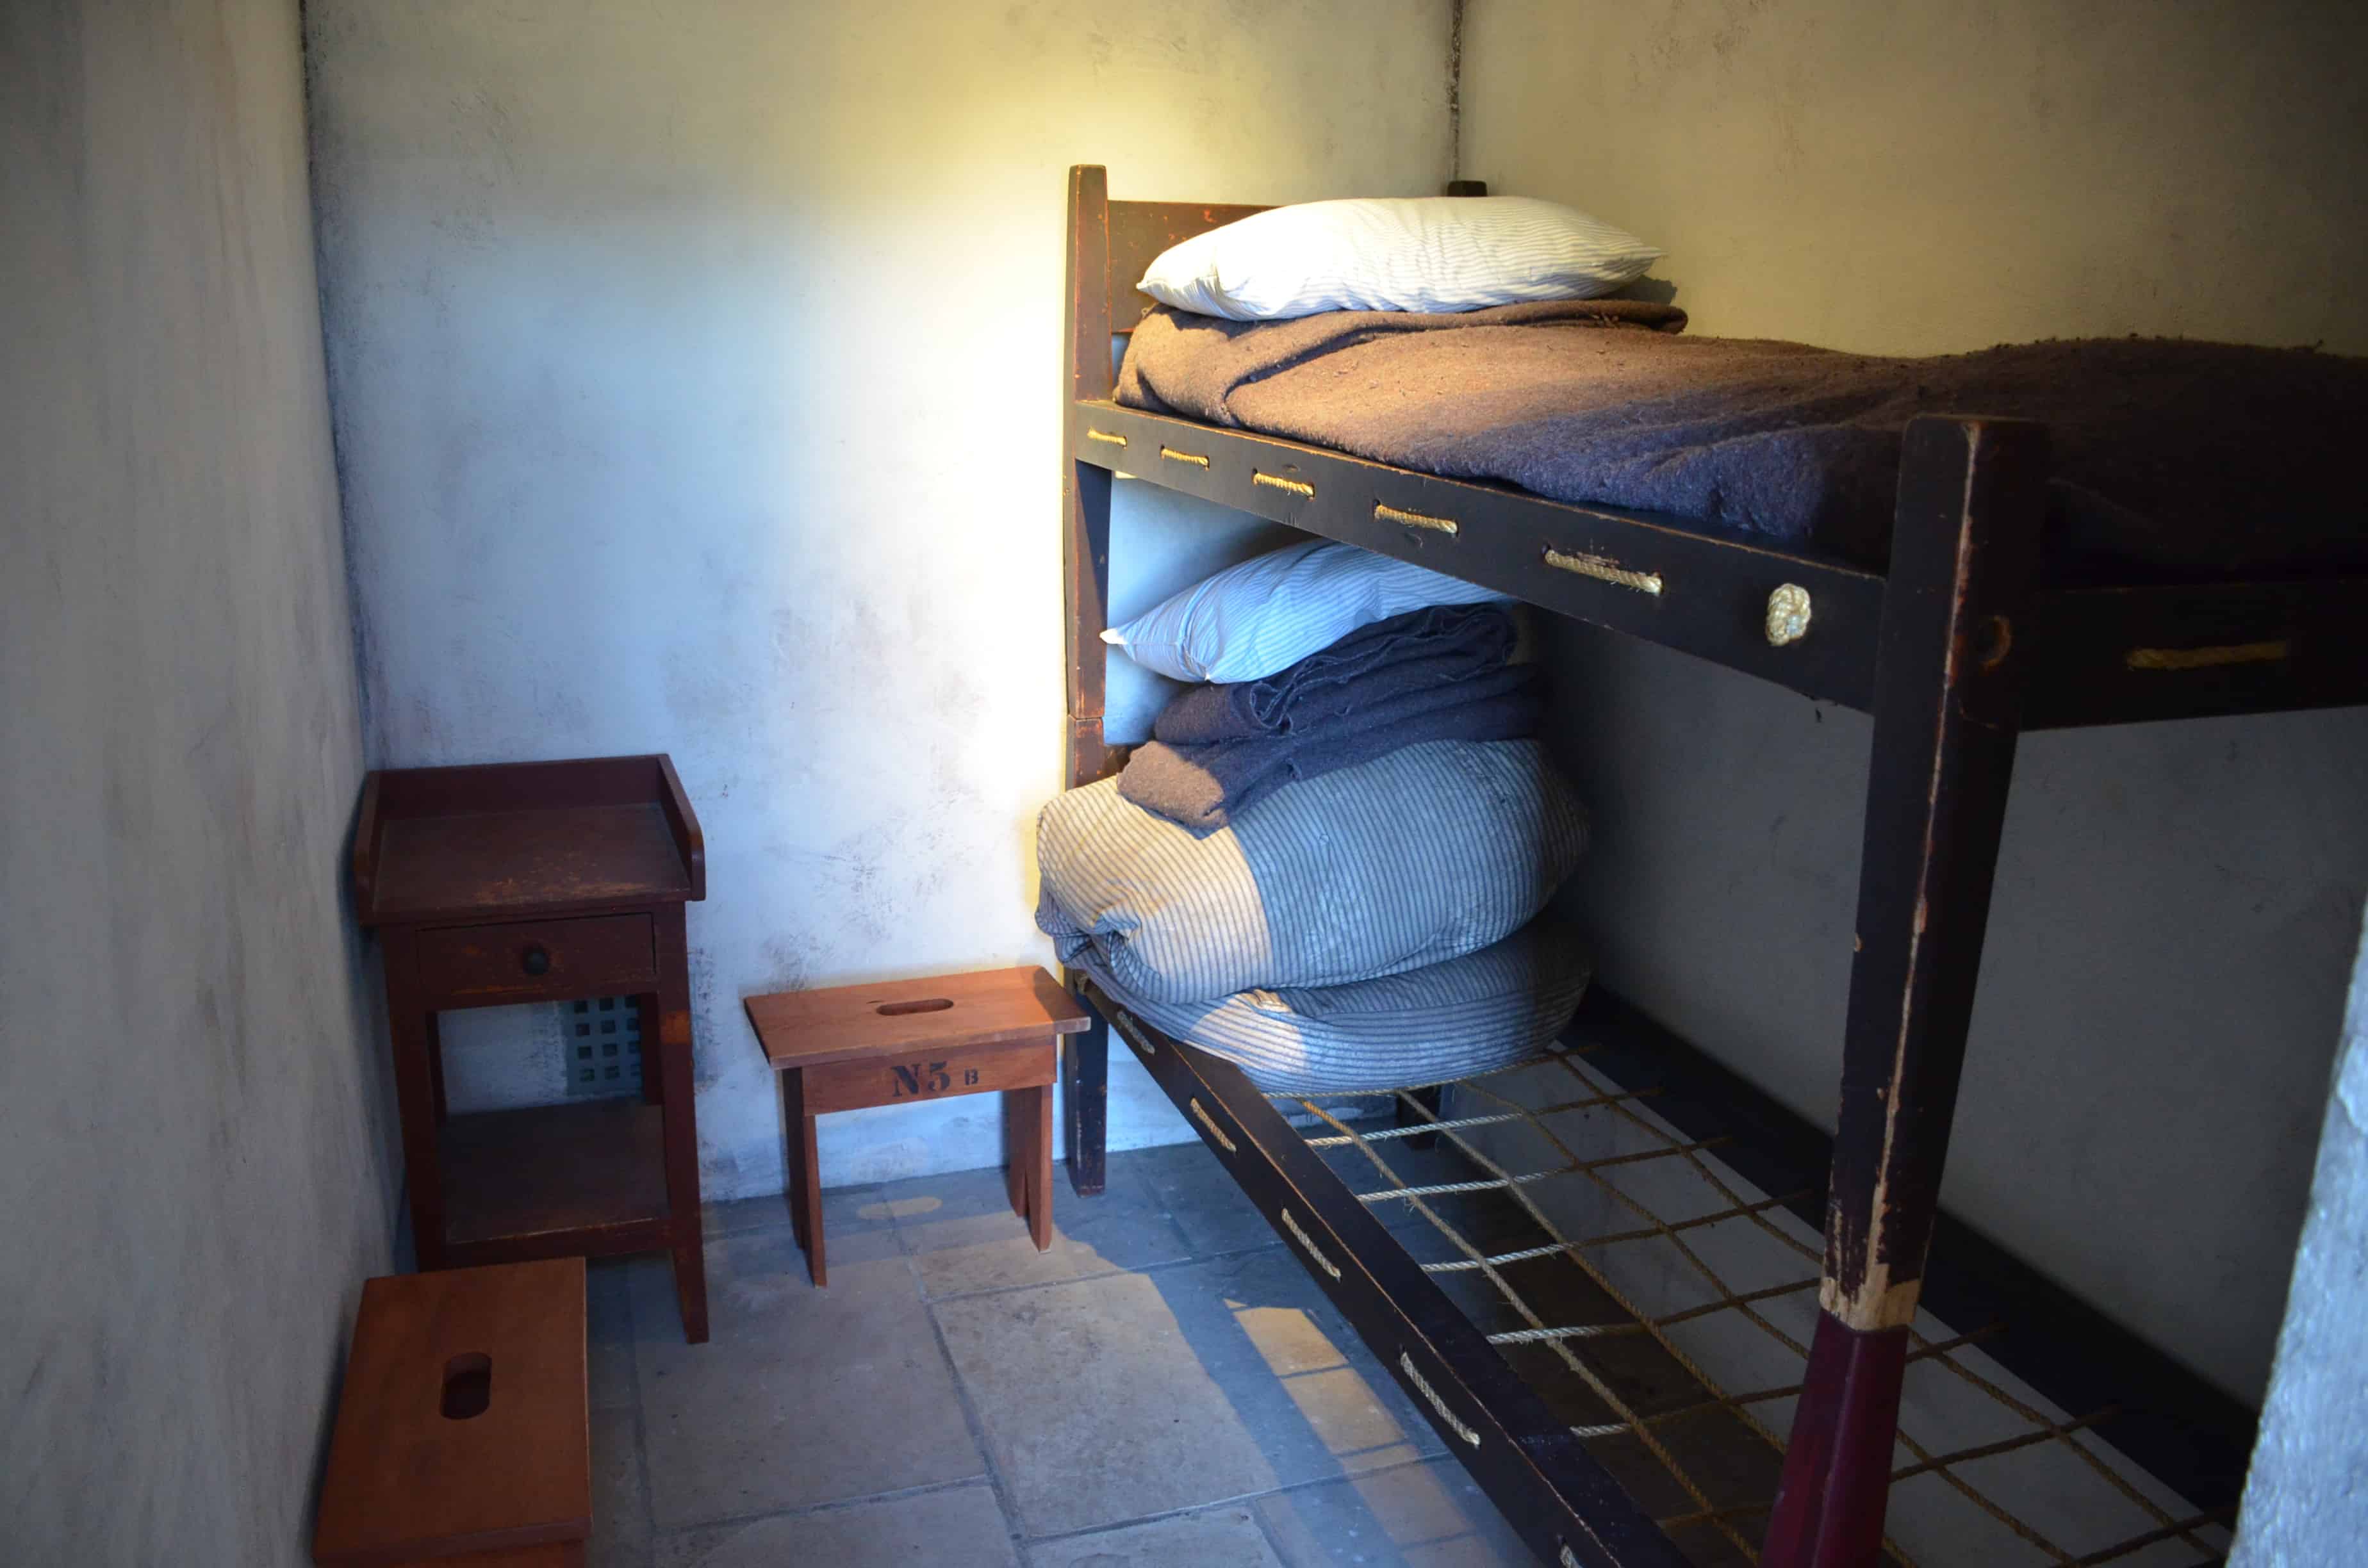 Prison cell at Wyoming Territorial Prison State Historic Site in Laramie